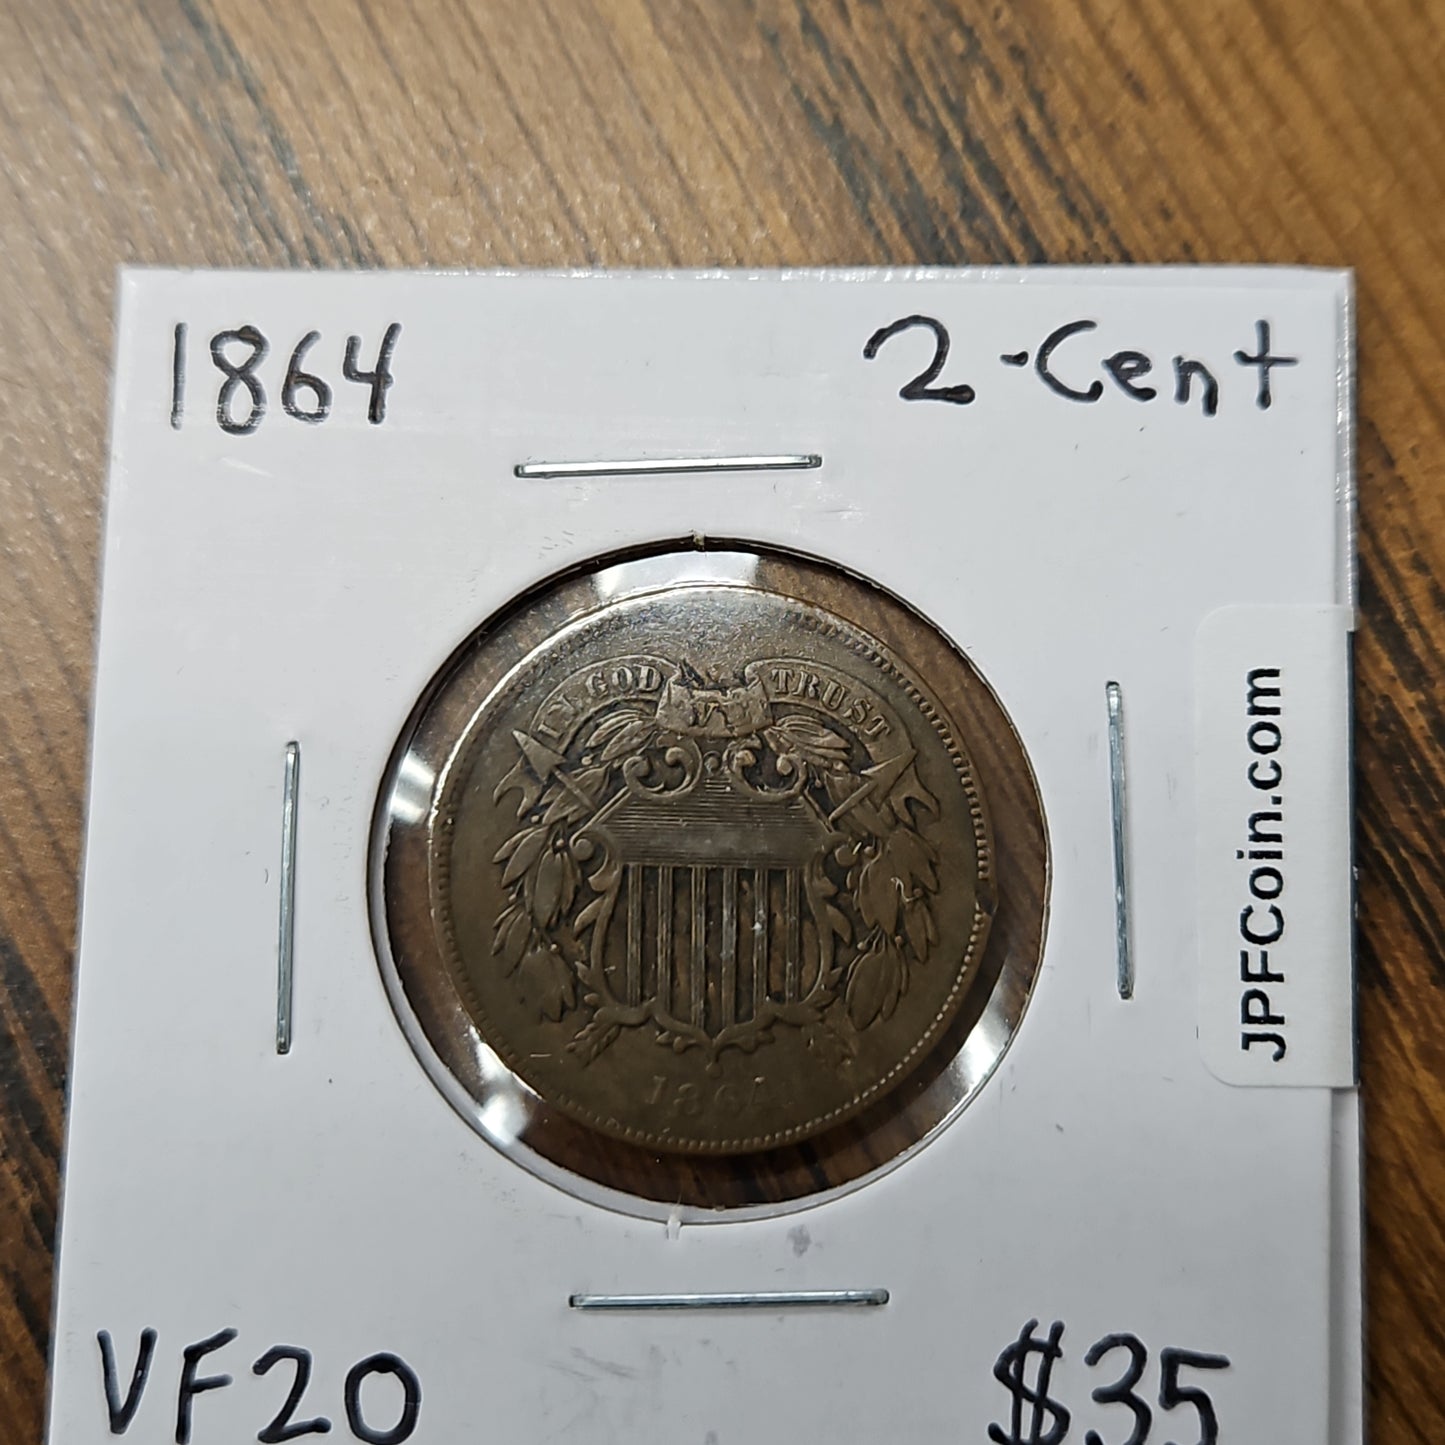 1864 Two-Cent Piece 2-Cent